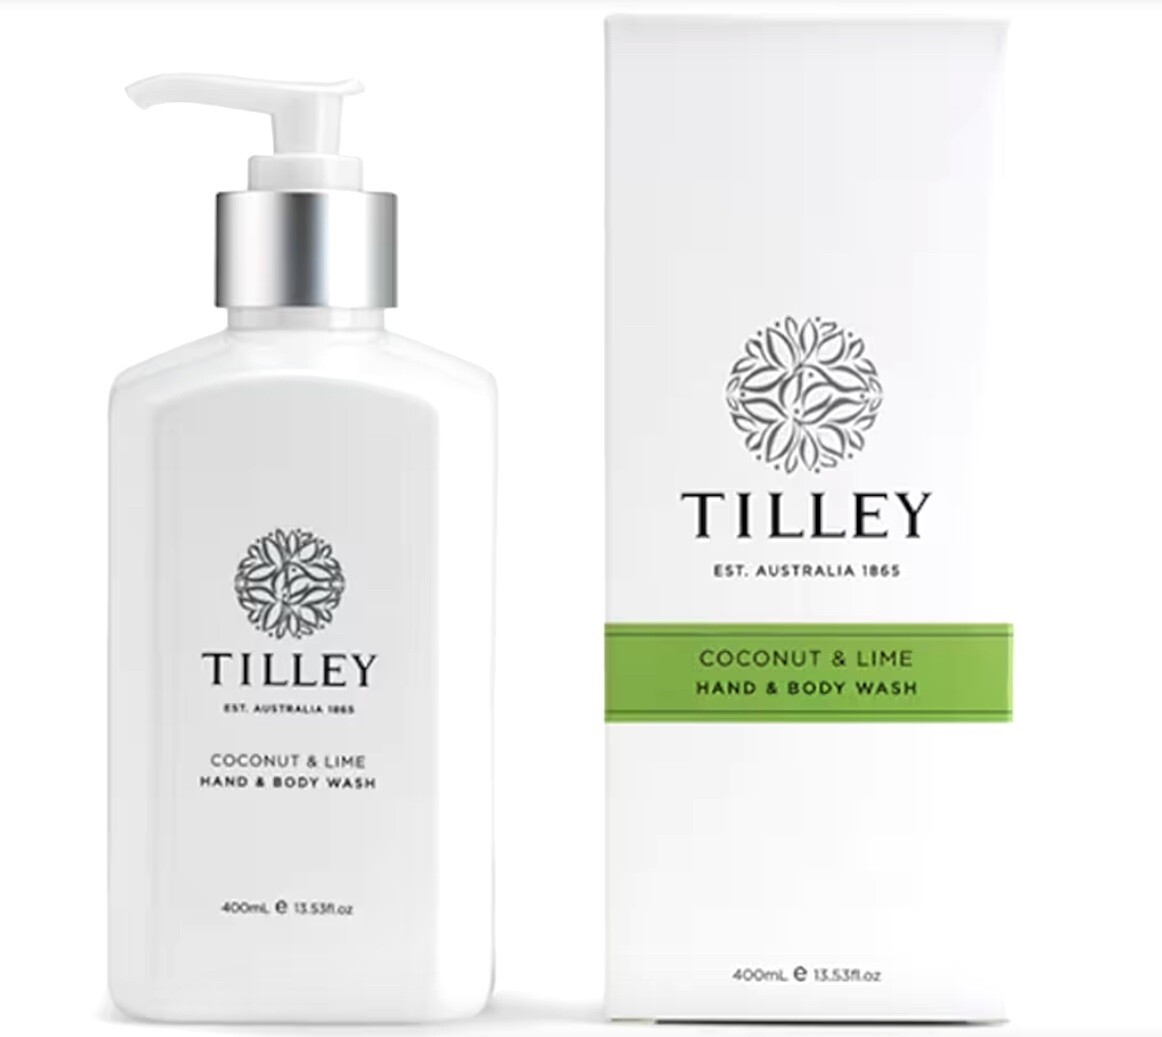 Tilley - Hand & Body Wash 400ml  - Coconut & Lime